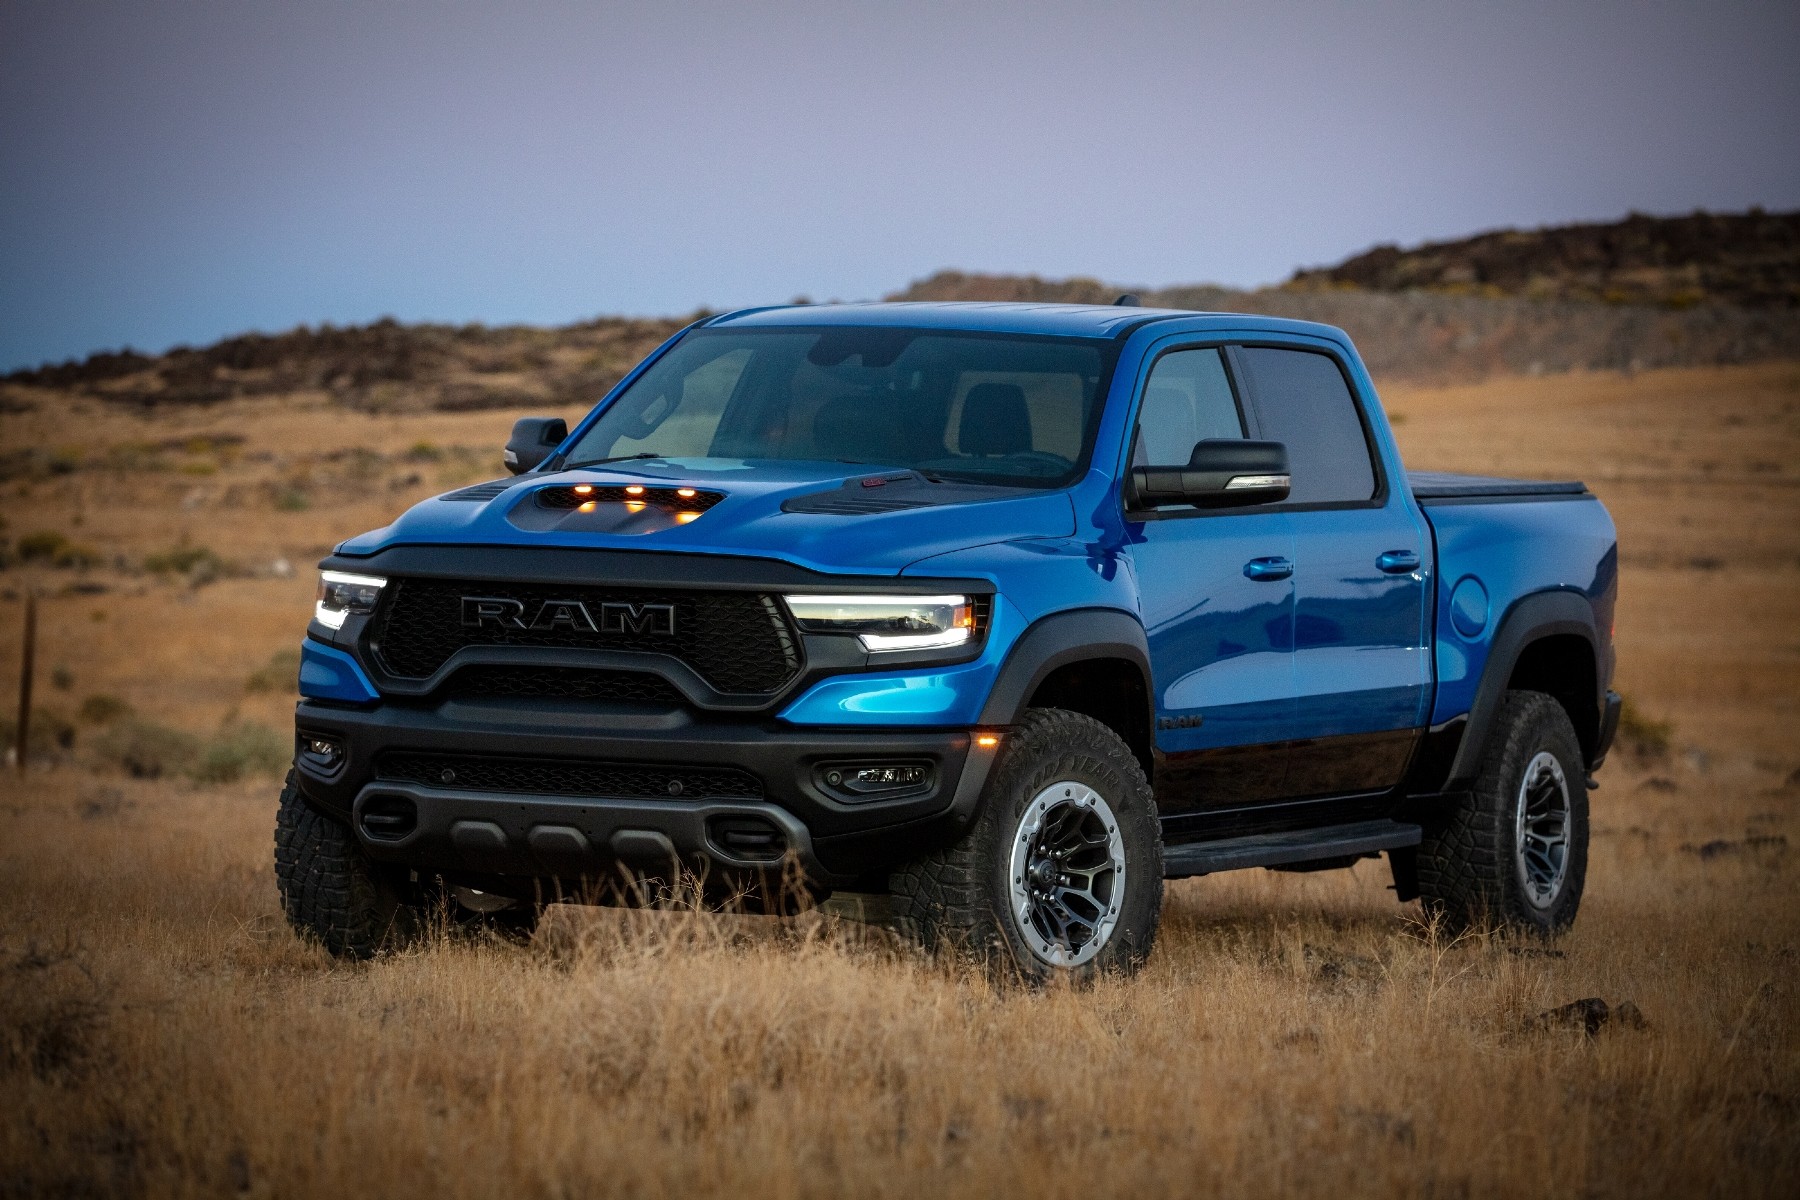 Ram 1500 EcoDiesel Production Concluding Next Year, Electric Successor